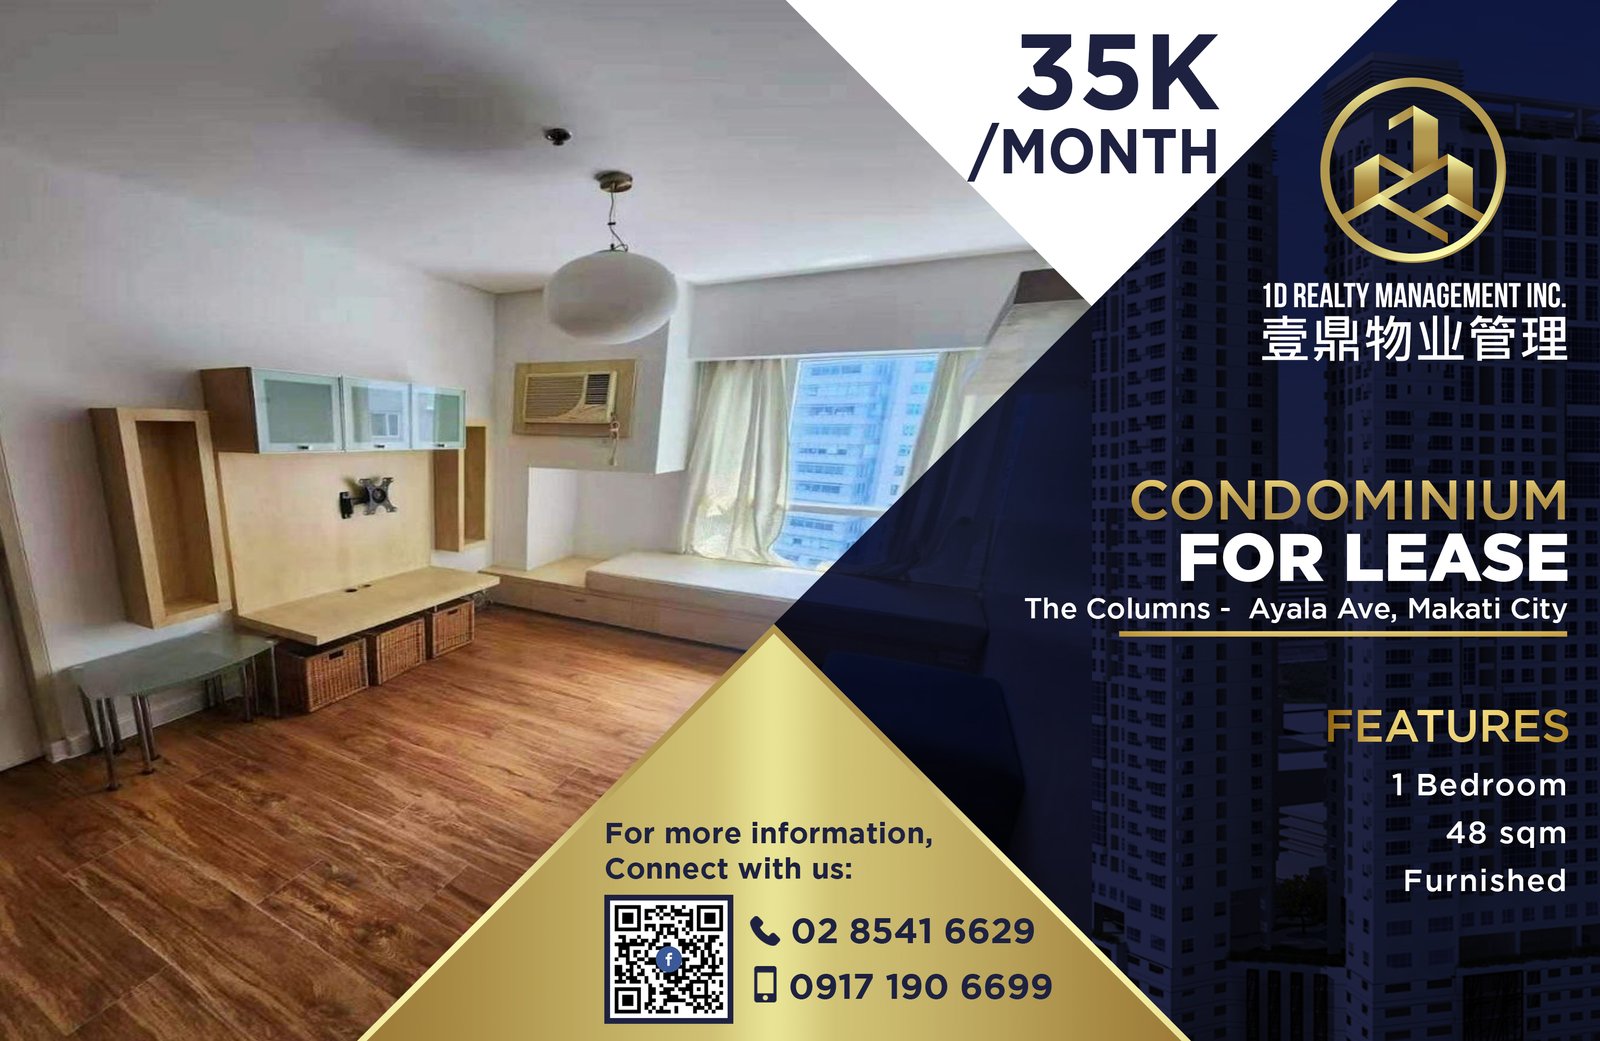 The Columns -  Ayala Ave, Makati City - 1BR FOR LEASE